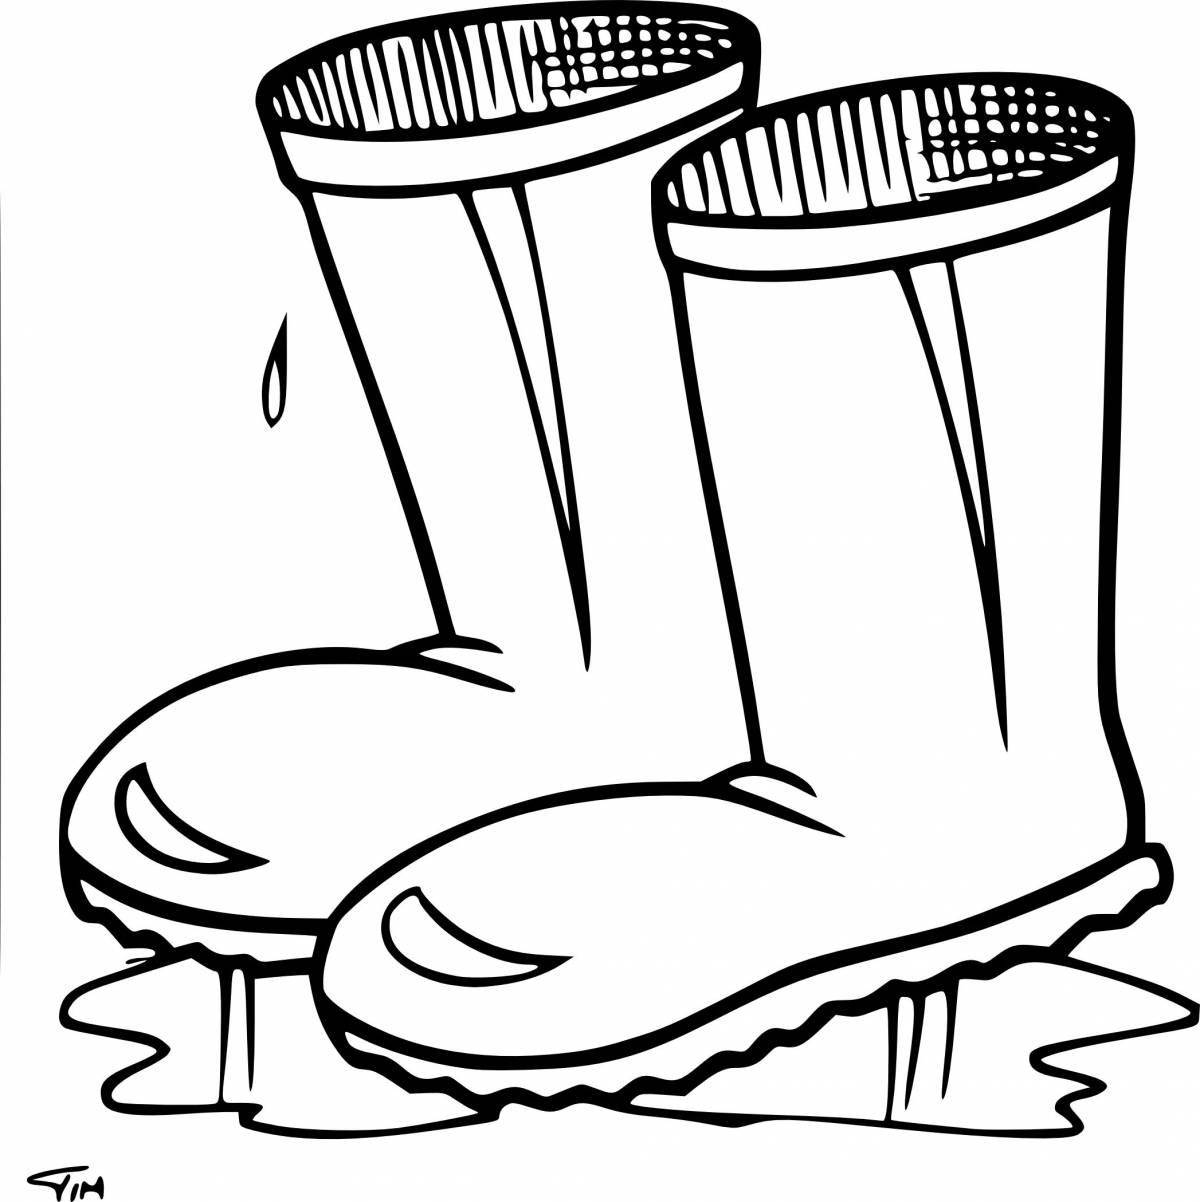 Fantastic rubber boots coloring page